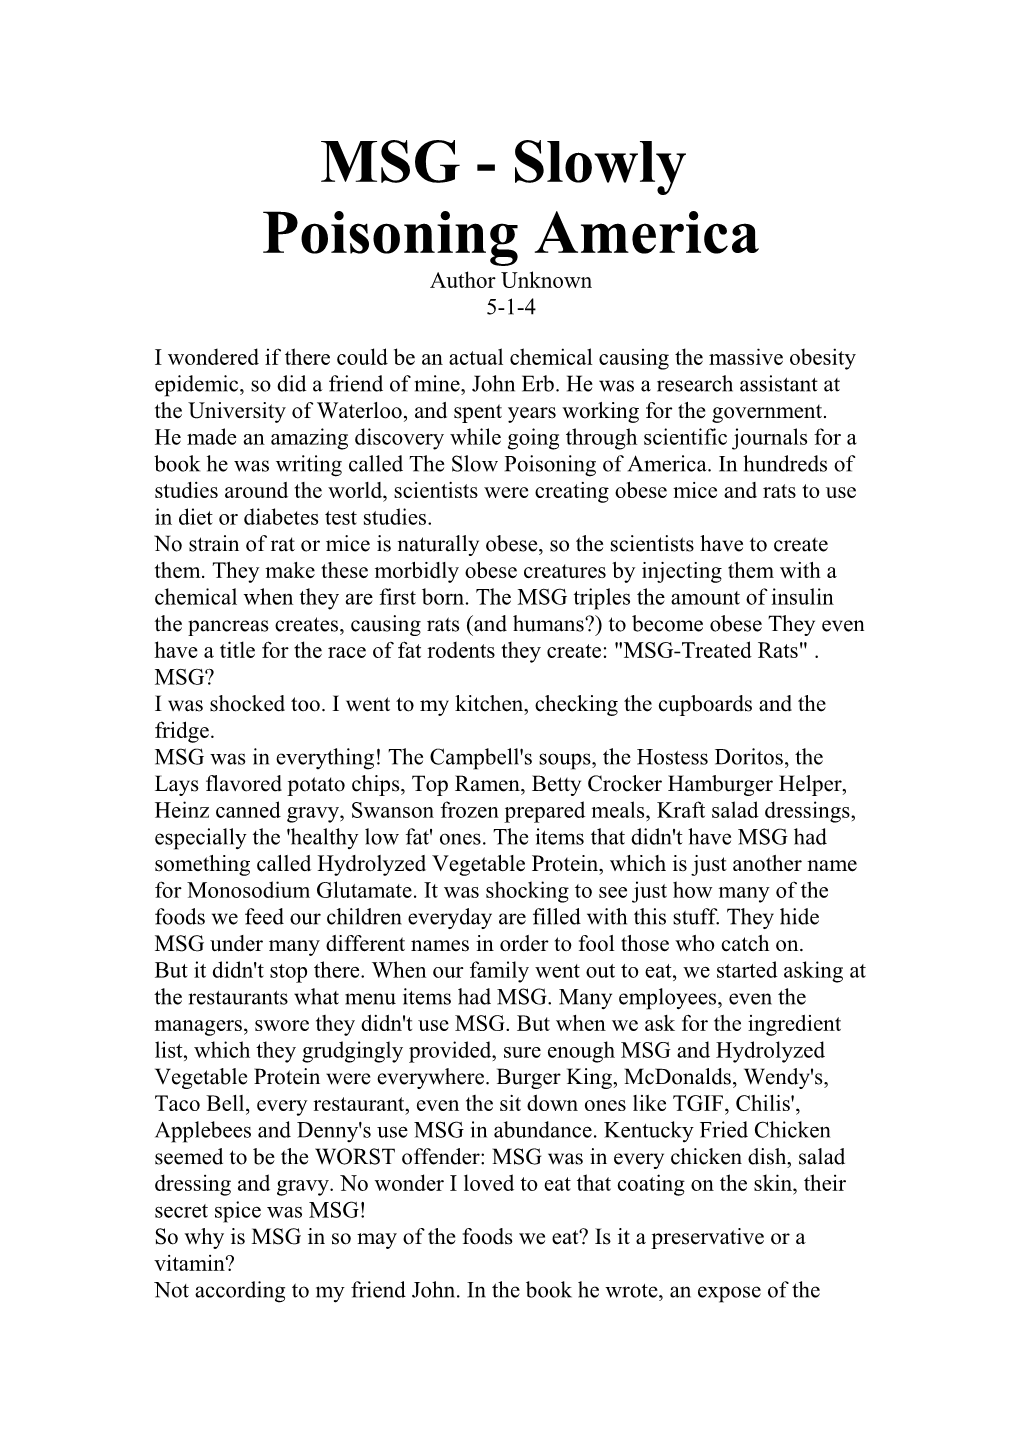 MSG - Slowly Poisoning America Author Unknown 5-1-4